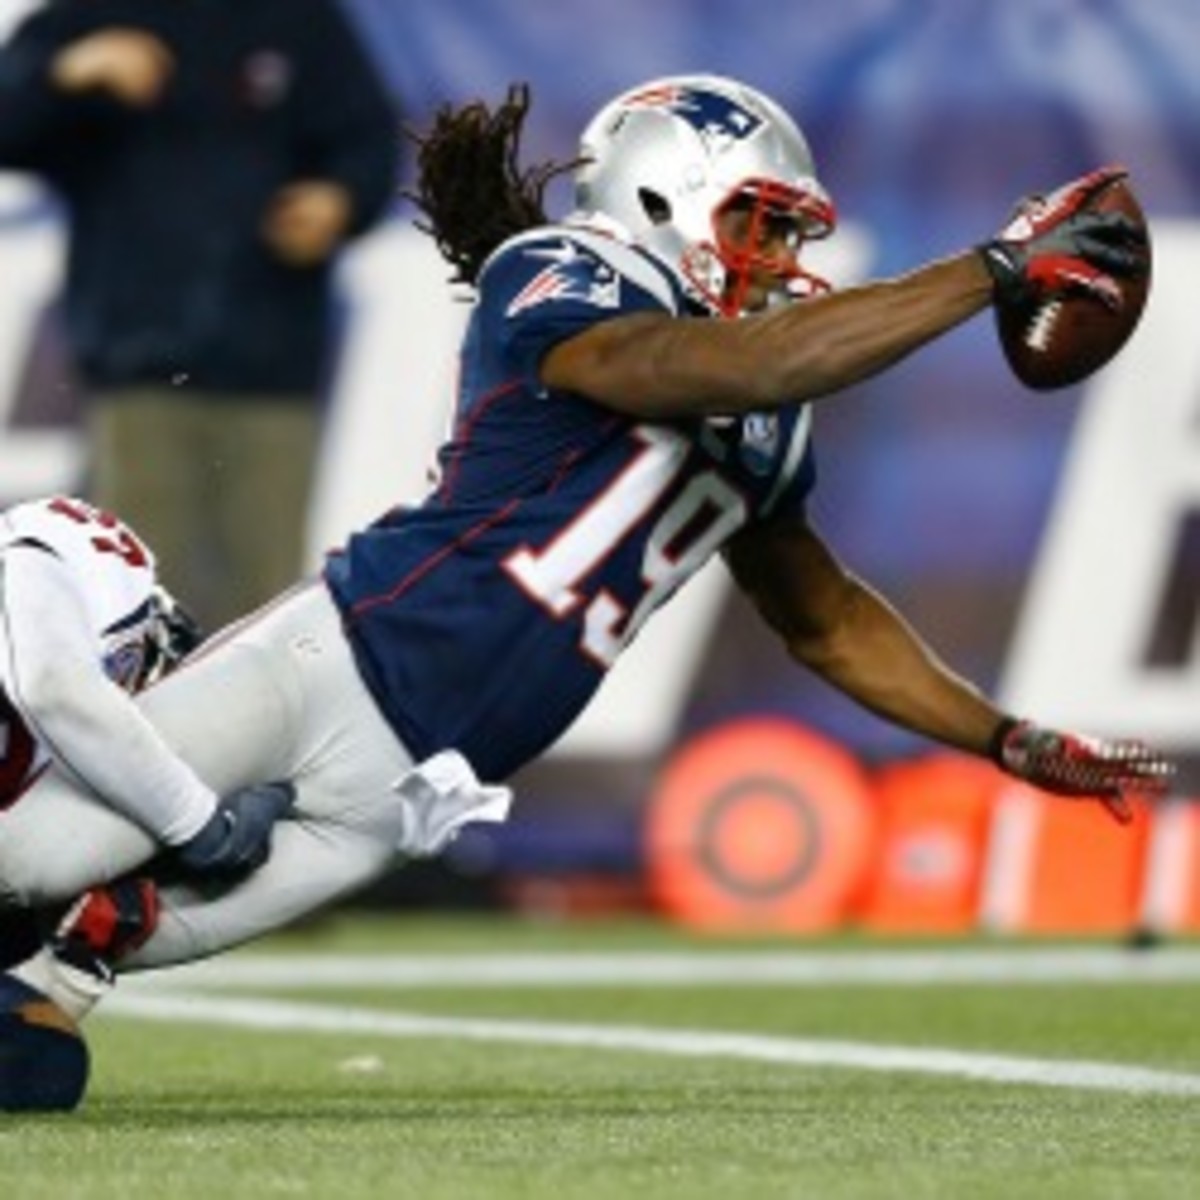 The Patriots placed Donte Stallworth on injured reserve with an ankle injury. (Jared Wickerham/Getty Images)